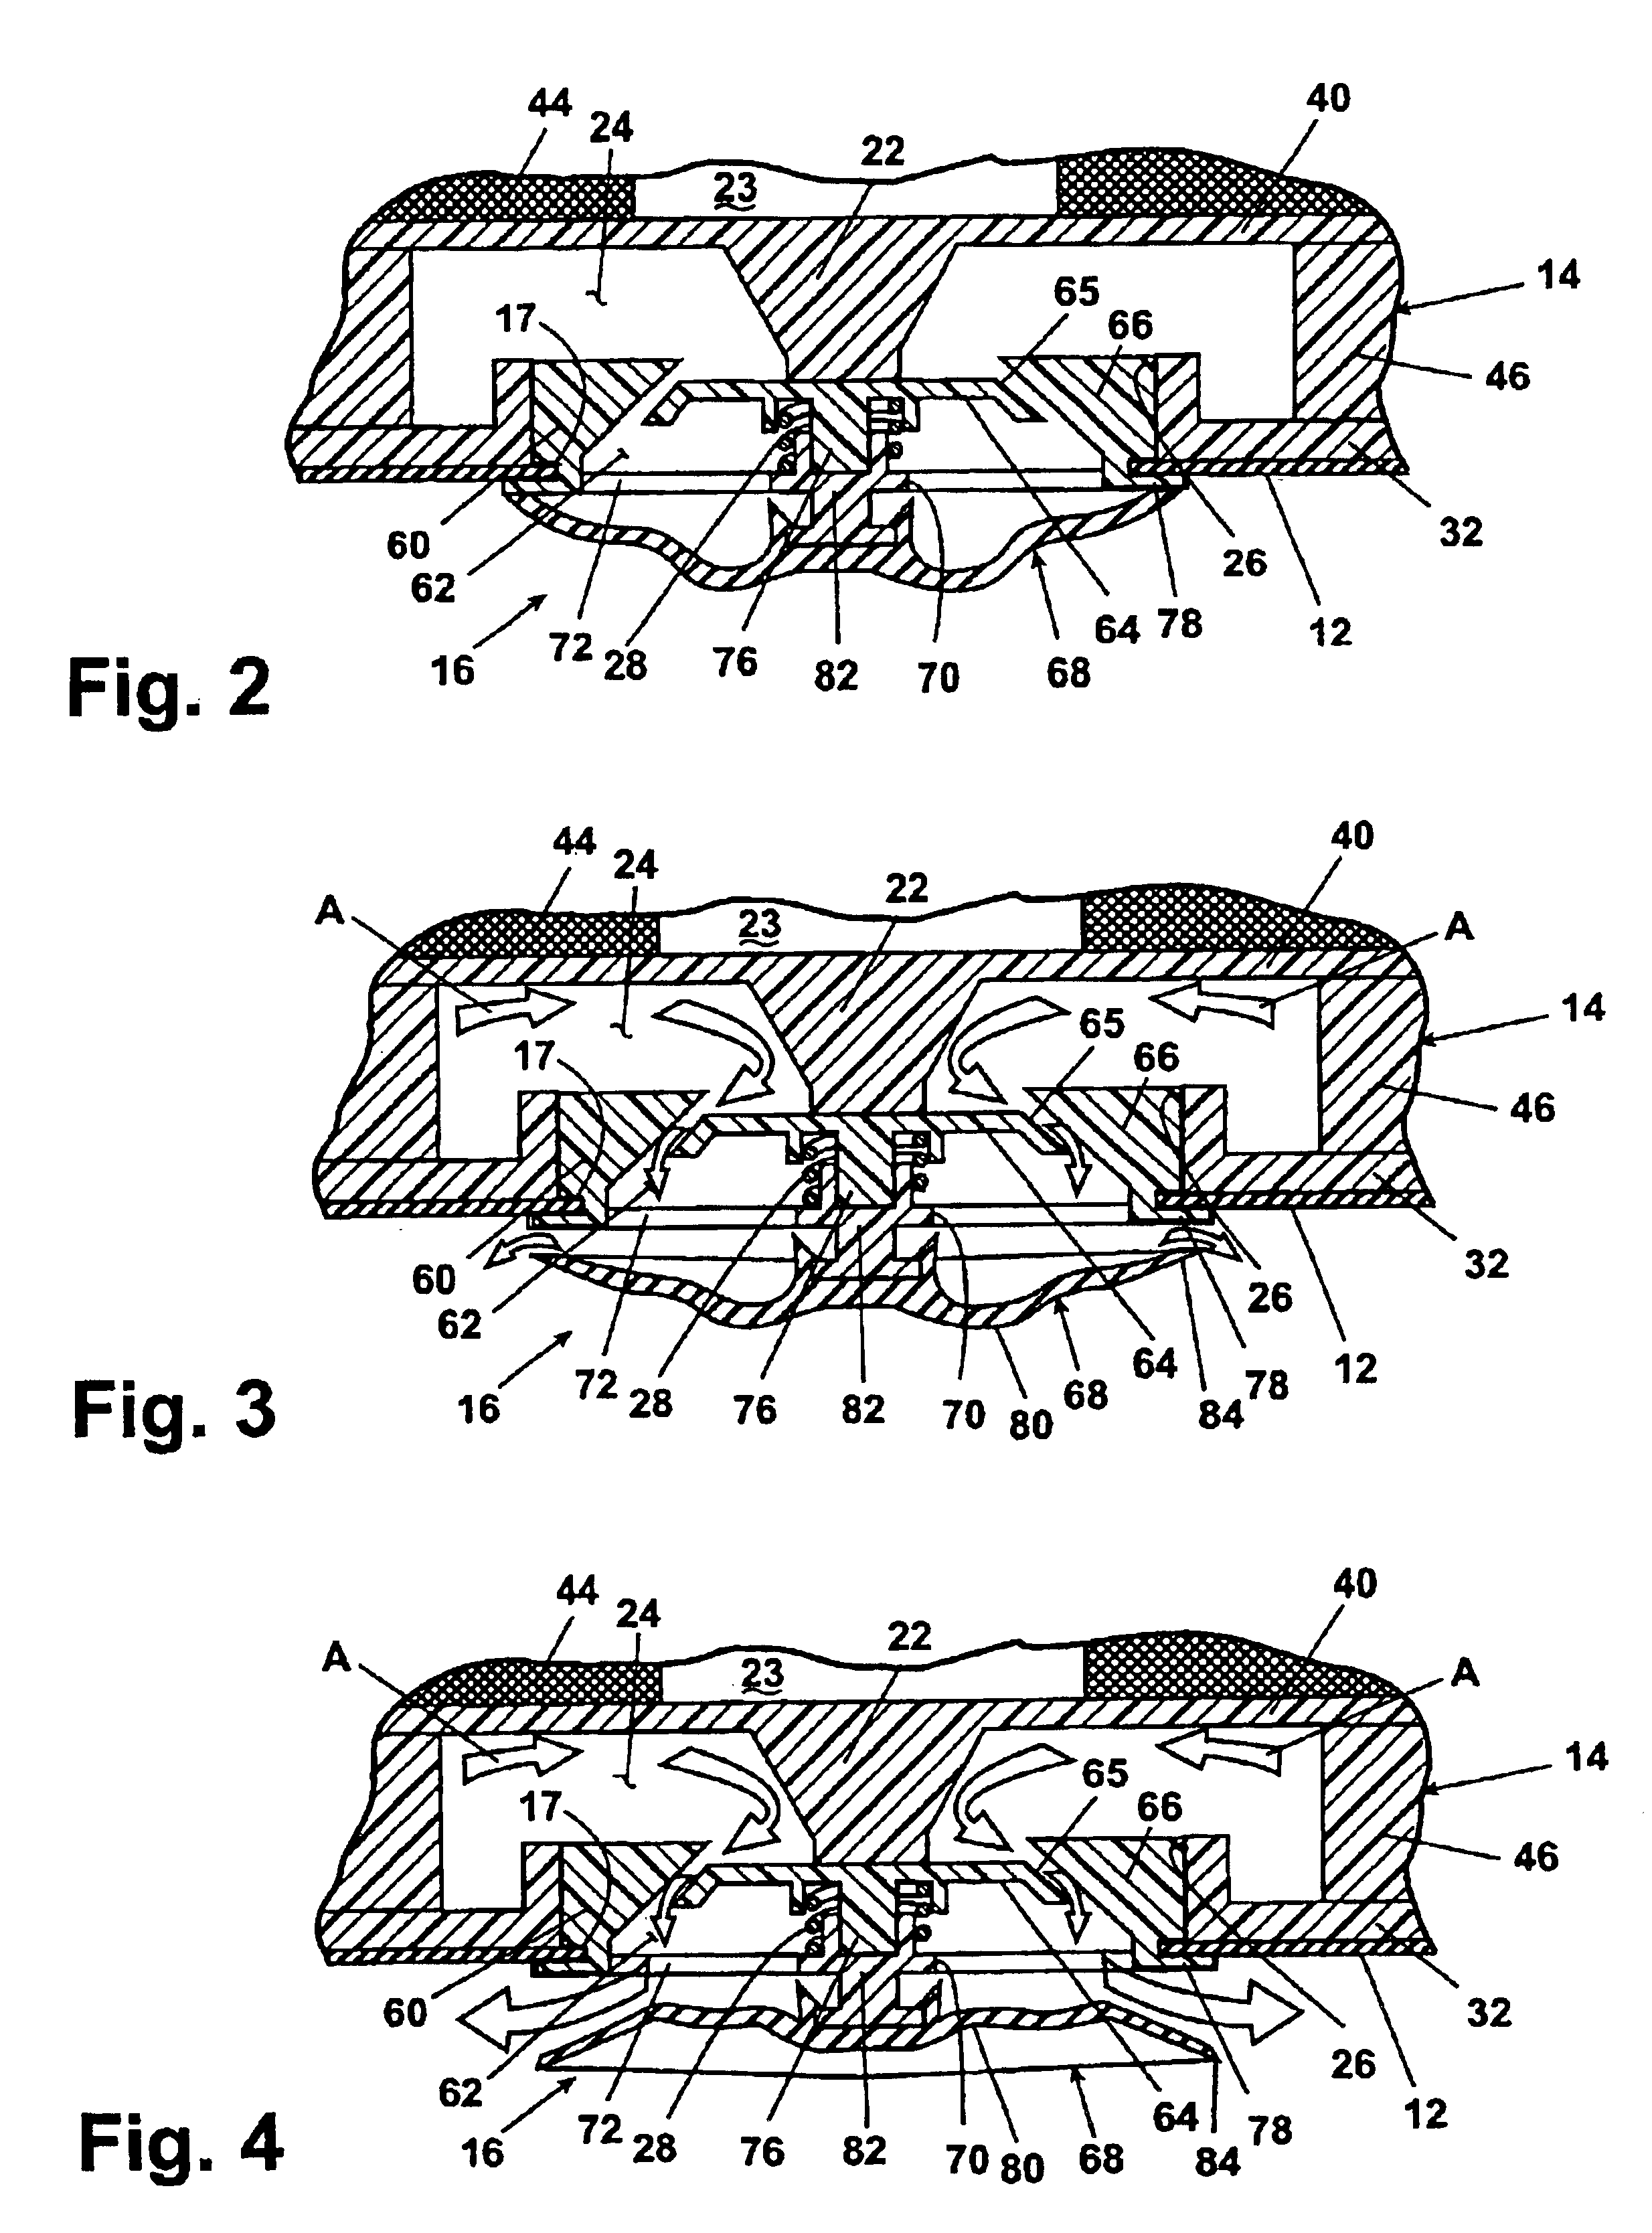 Self-sealing filter connection and gas mask filter assembly incorporating the same